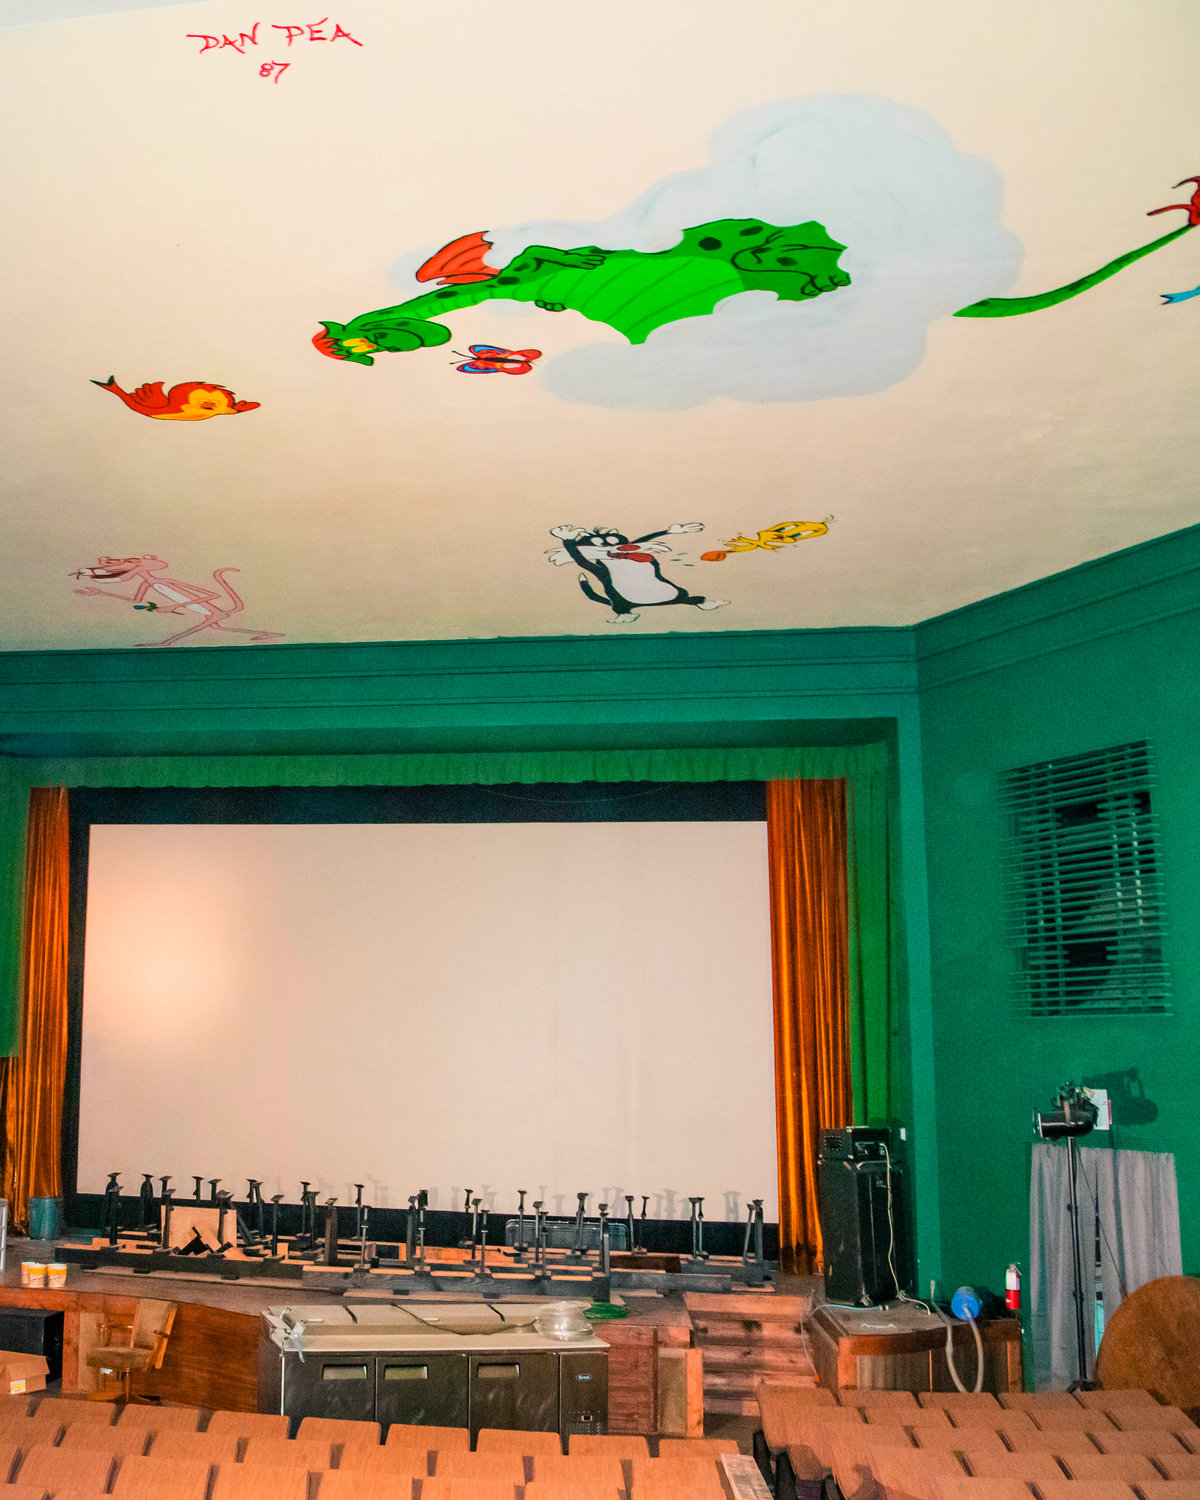 Illustrations on the roof will be painted over during renovations at the Chehalis Theater.